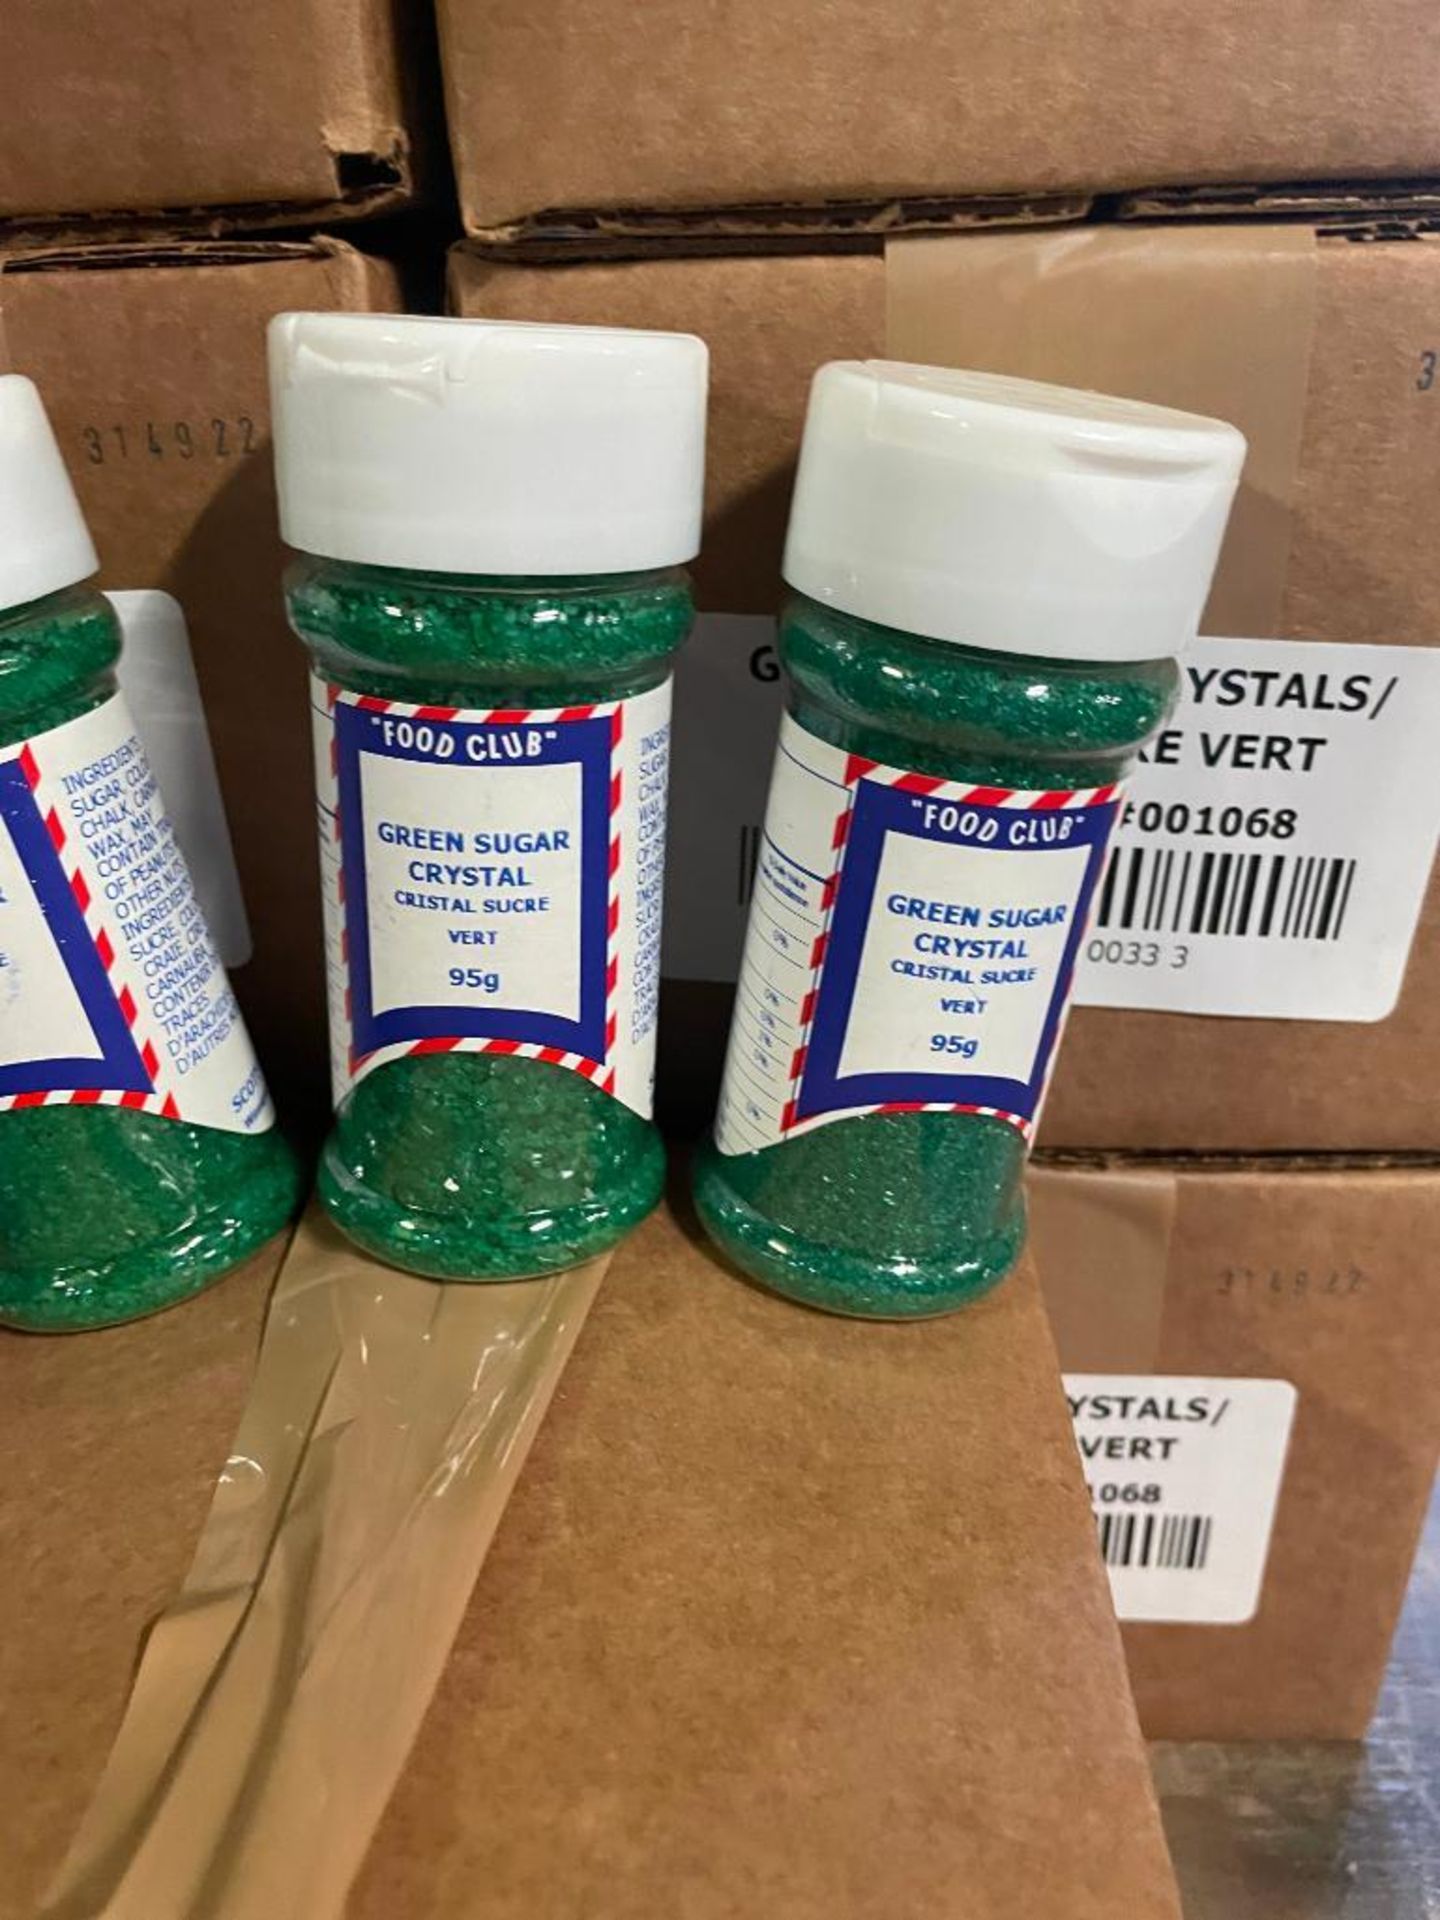 (7) BOXES OF FOOD CLUB GREEN SUGAR CRYSTALS, 12/95G BOTTLE PER BOX - Image 2 of 2